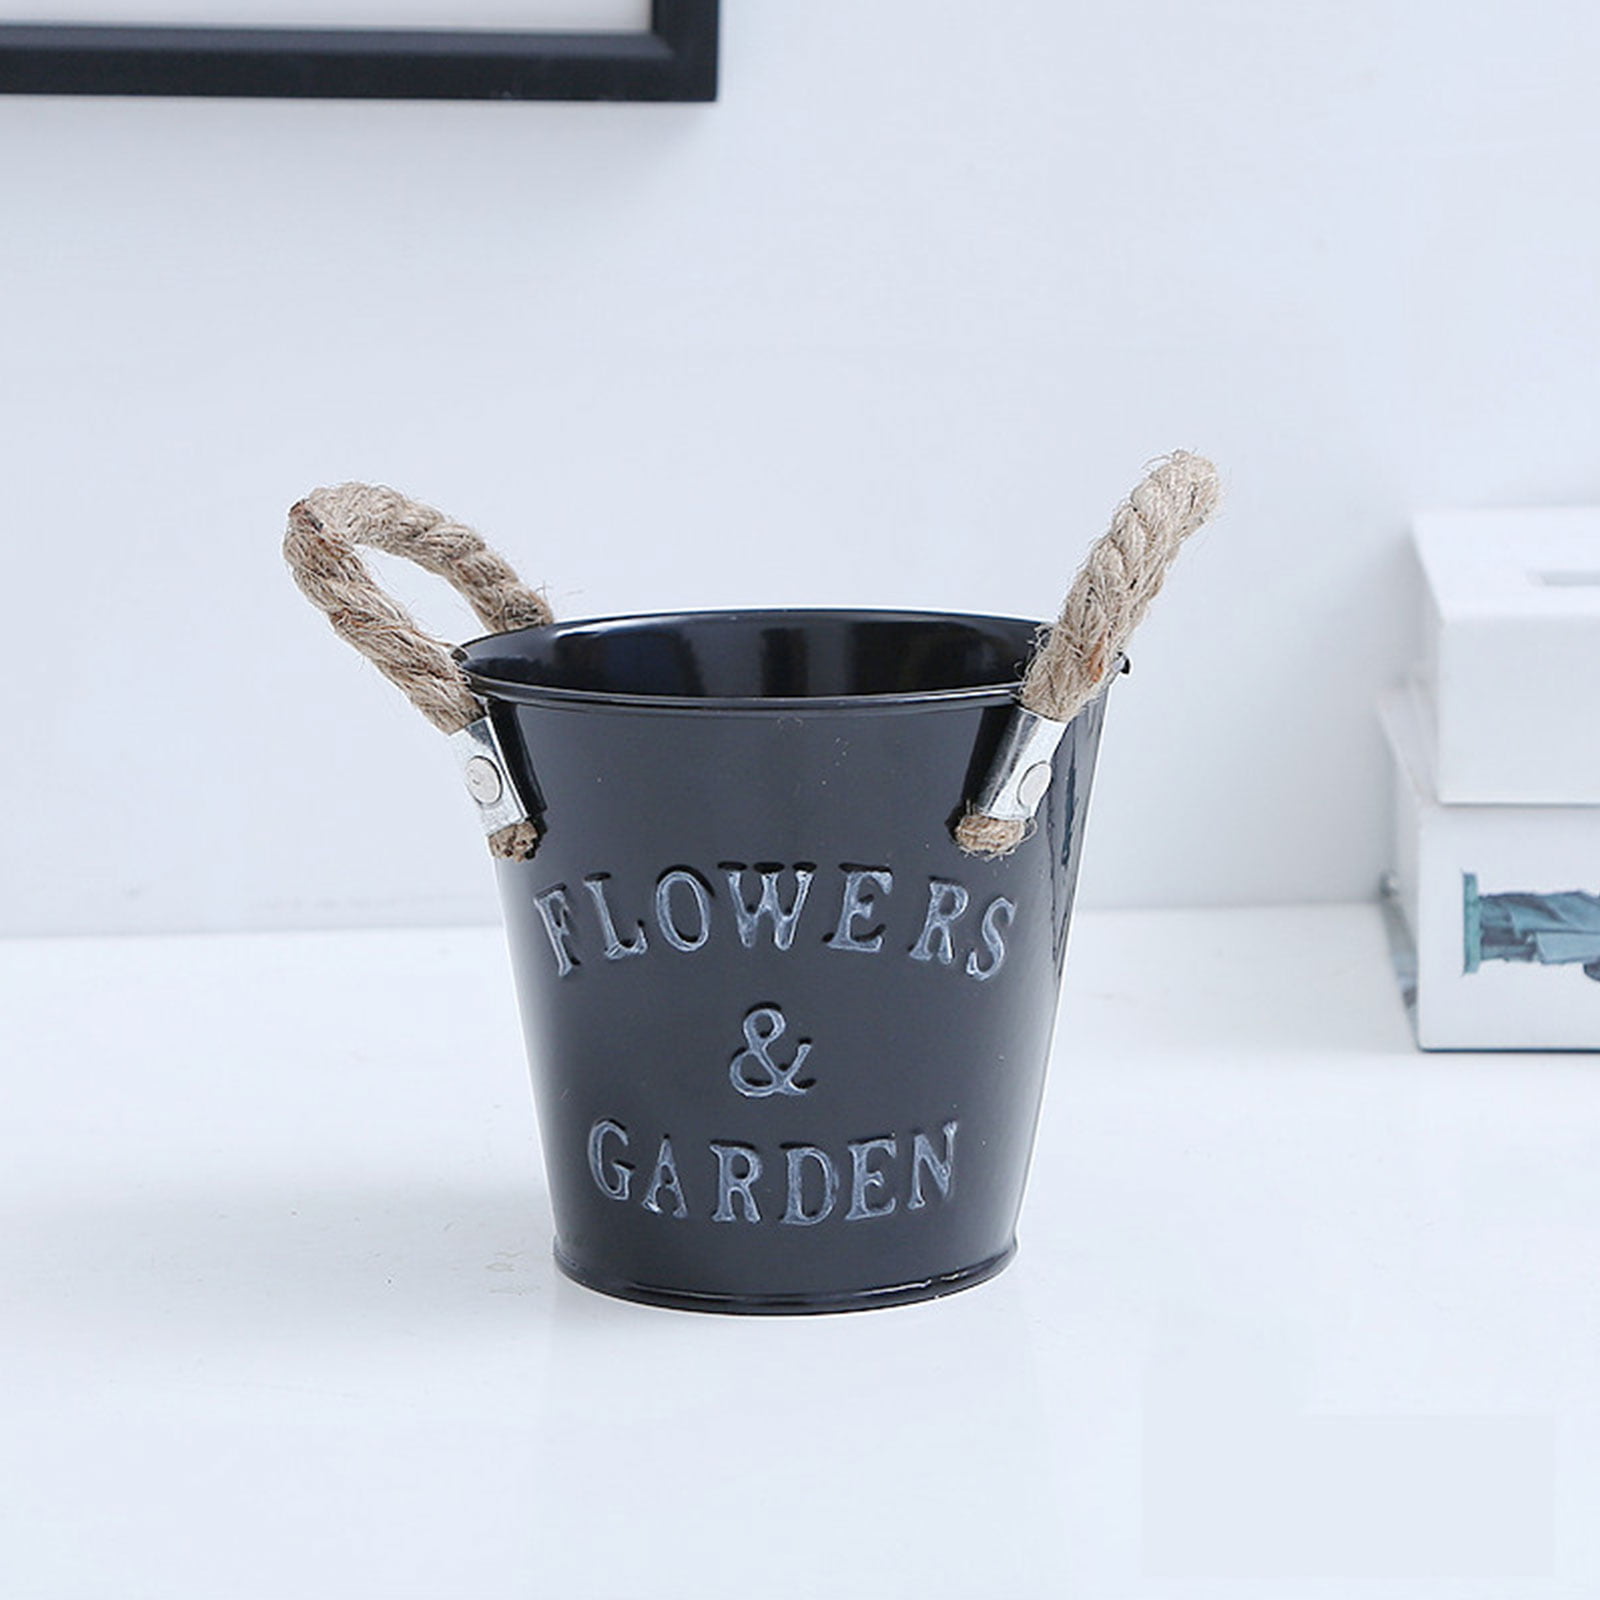 RUSTIC METAL PINK & BLUE TROUGH PLANTERS WITH ROPE HANDLES "FLOWERS & GARDEN" 